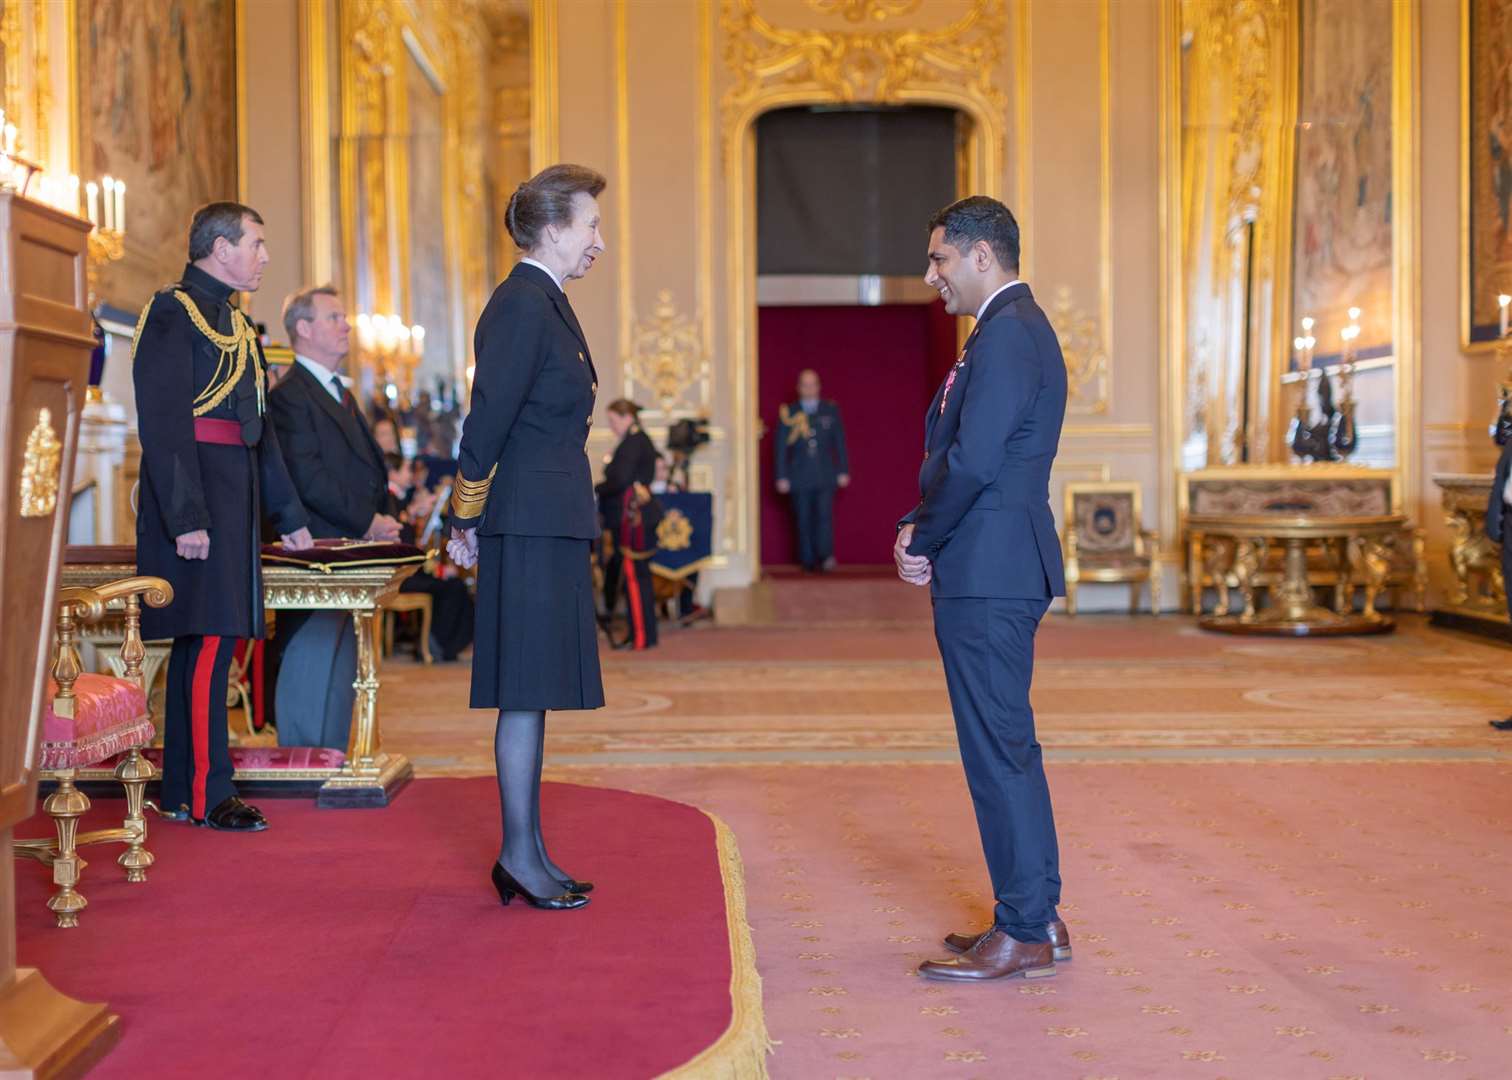 Gurvinder Sandher, from Cohesion Plus and Kent Equality Cohesion Council, received his MBE award by Anne Princess Royal at Windsor Castle. Picture: Gurvinder Sandher